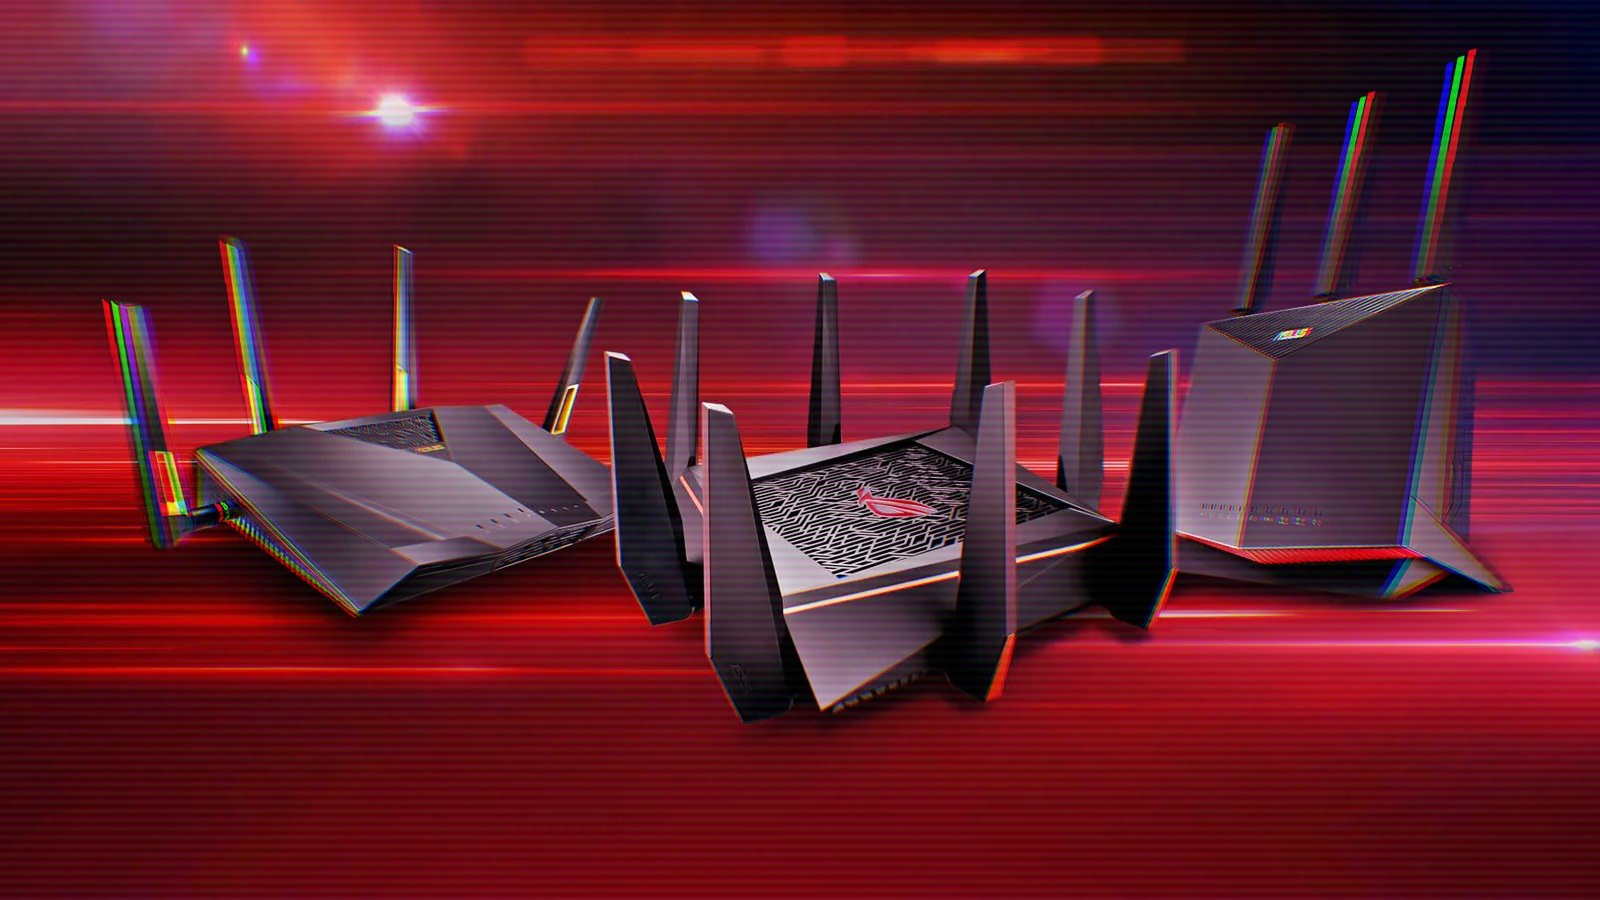 ASUS addressed critical flaws in some router models